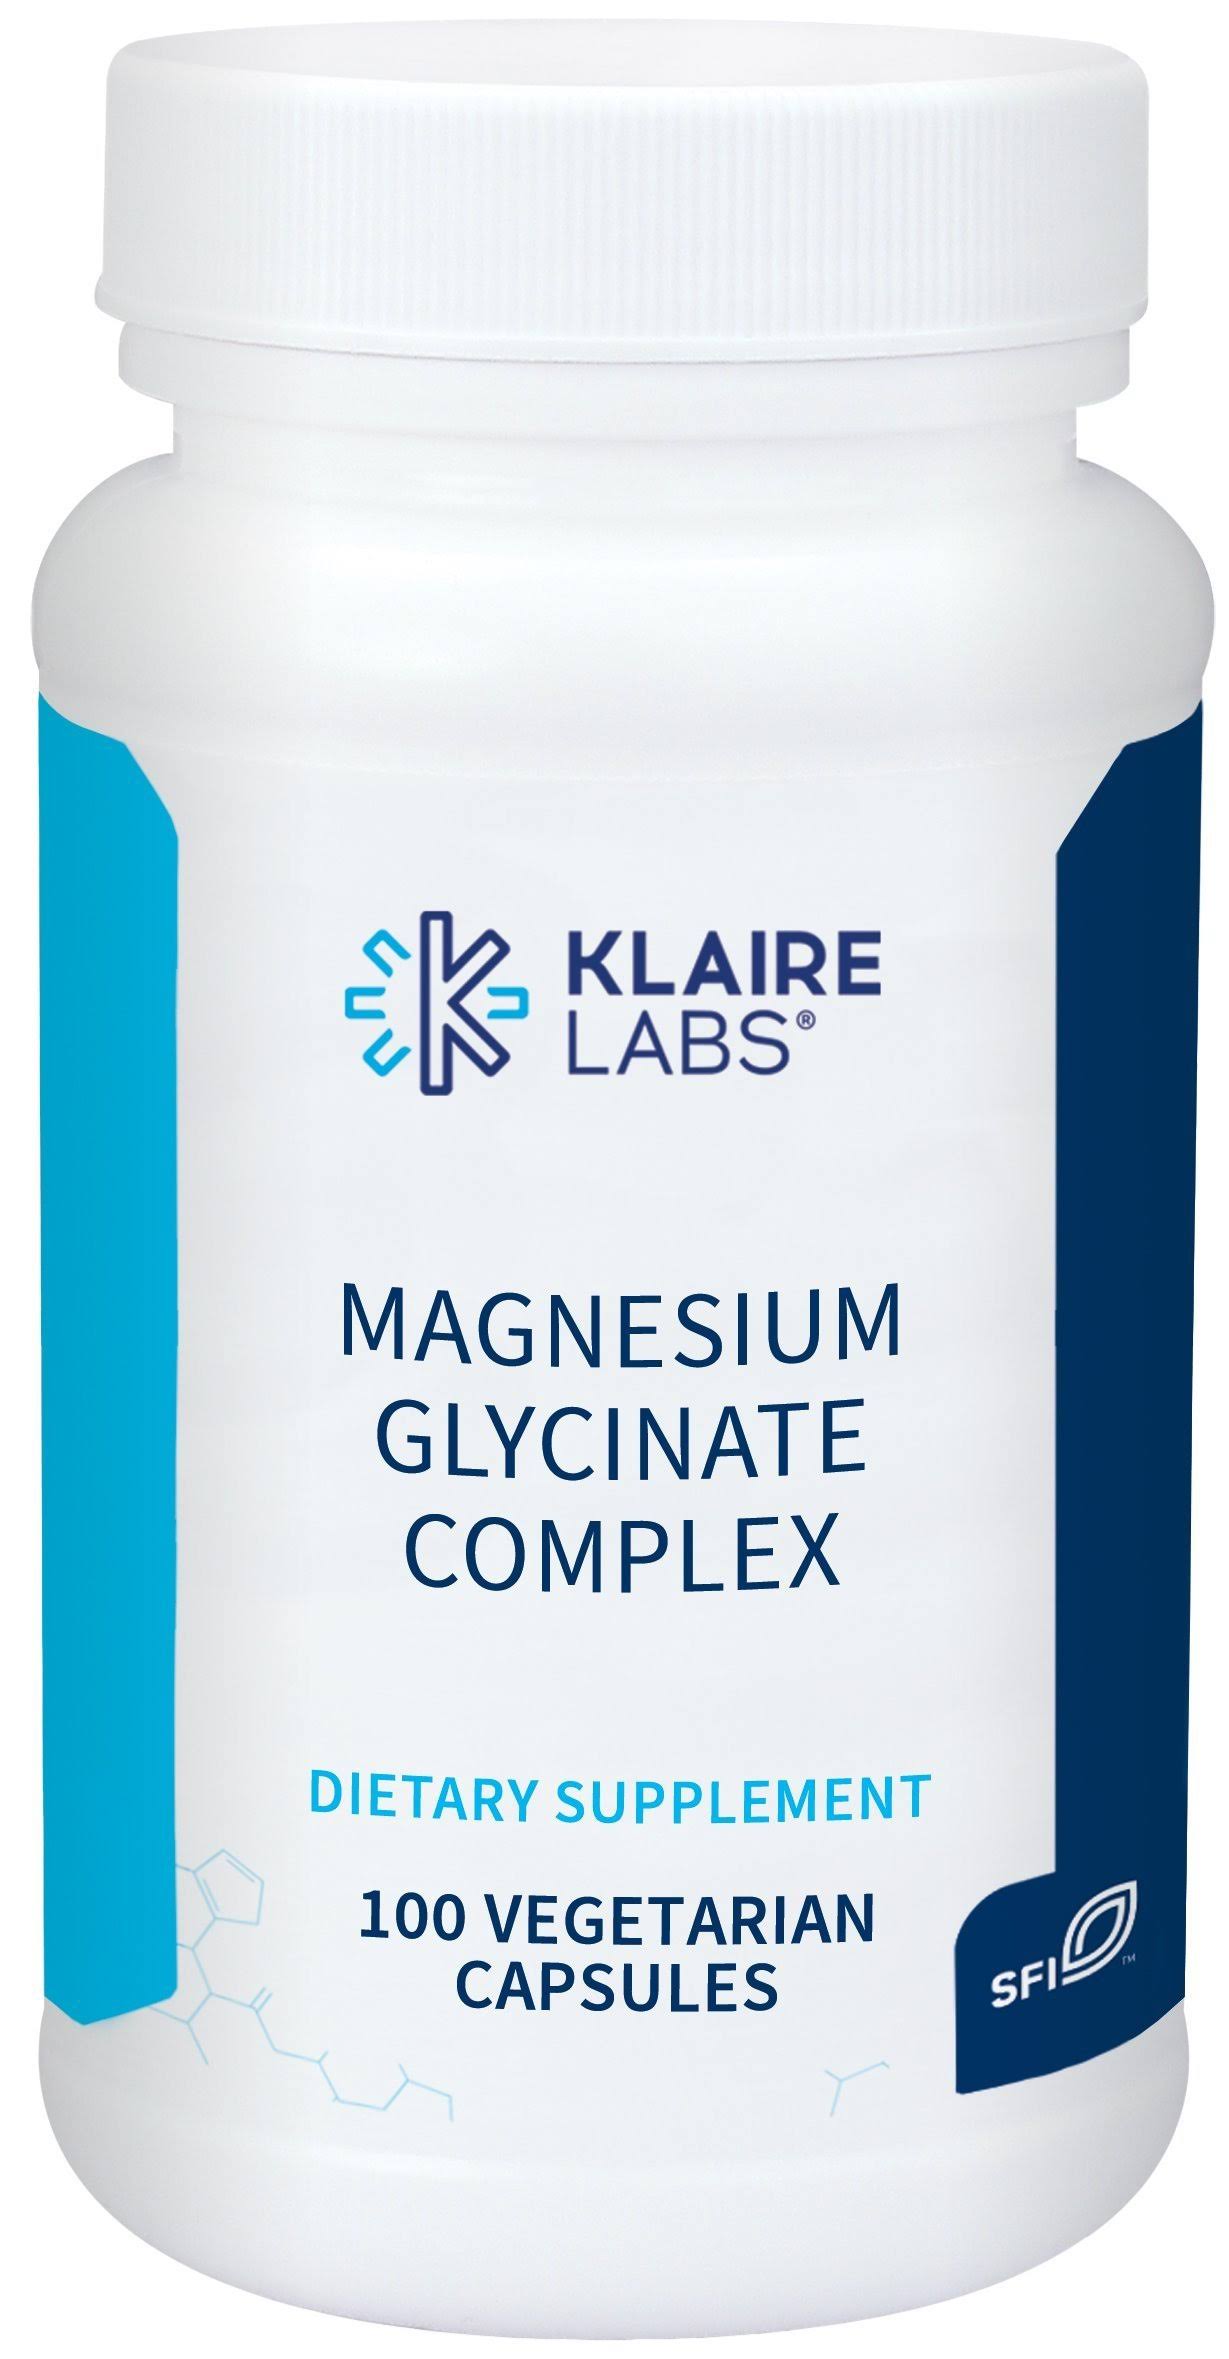 Klaire Labs Magnesium Glycinate Dietary Supplement - 100 Count